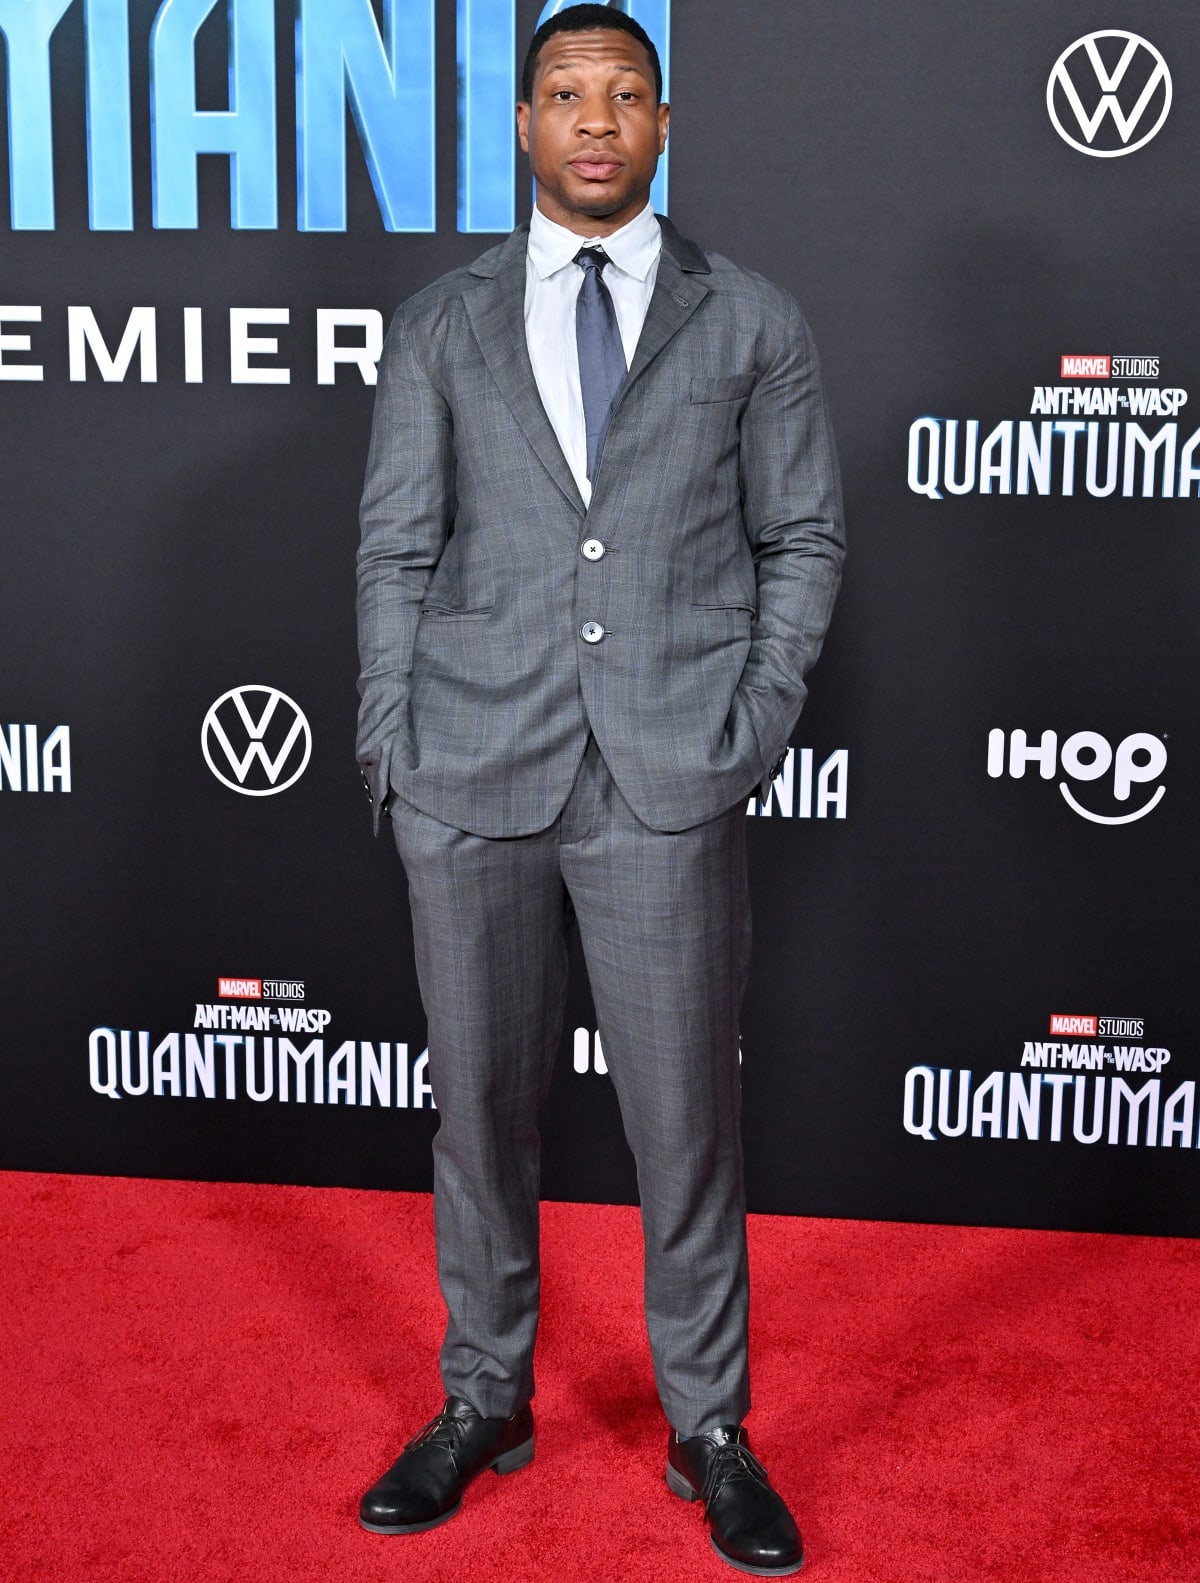 Stepping out in a grey suit, Jonathan Majors made an appearance at the premiere of Ant-Man and the Wasp: Quantumania